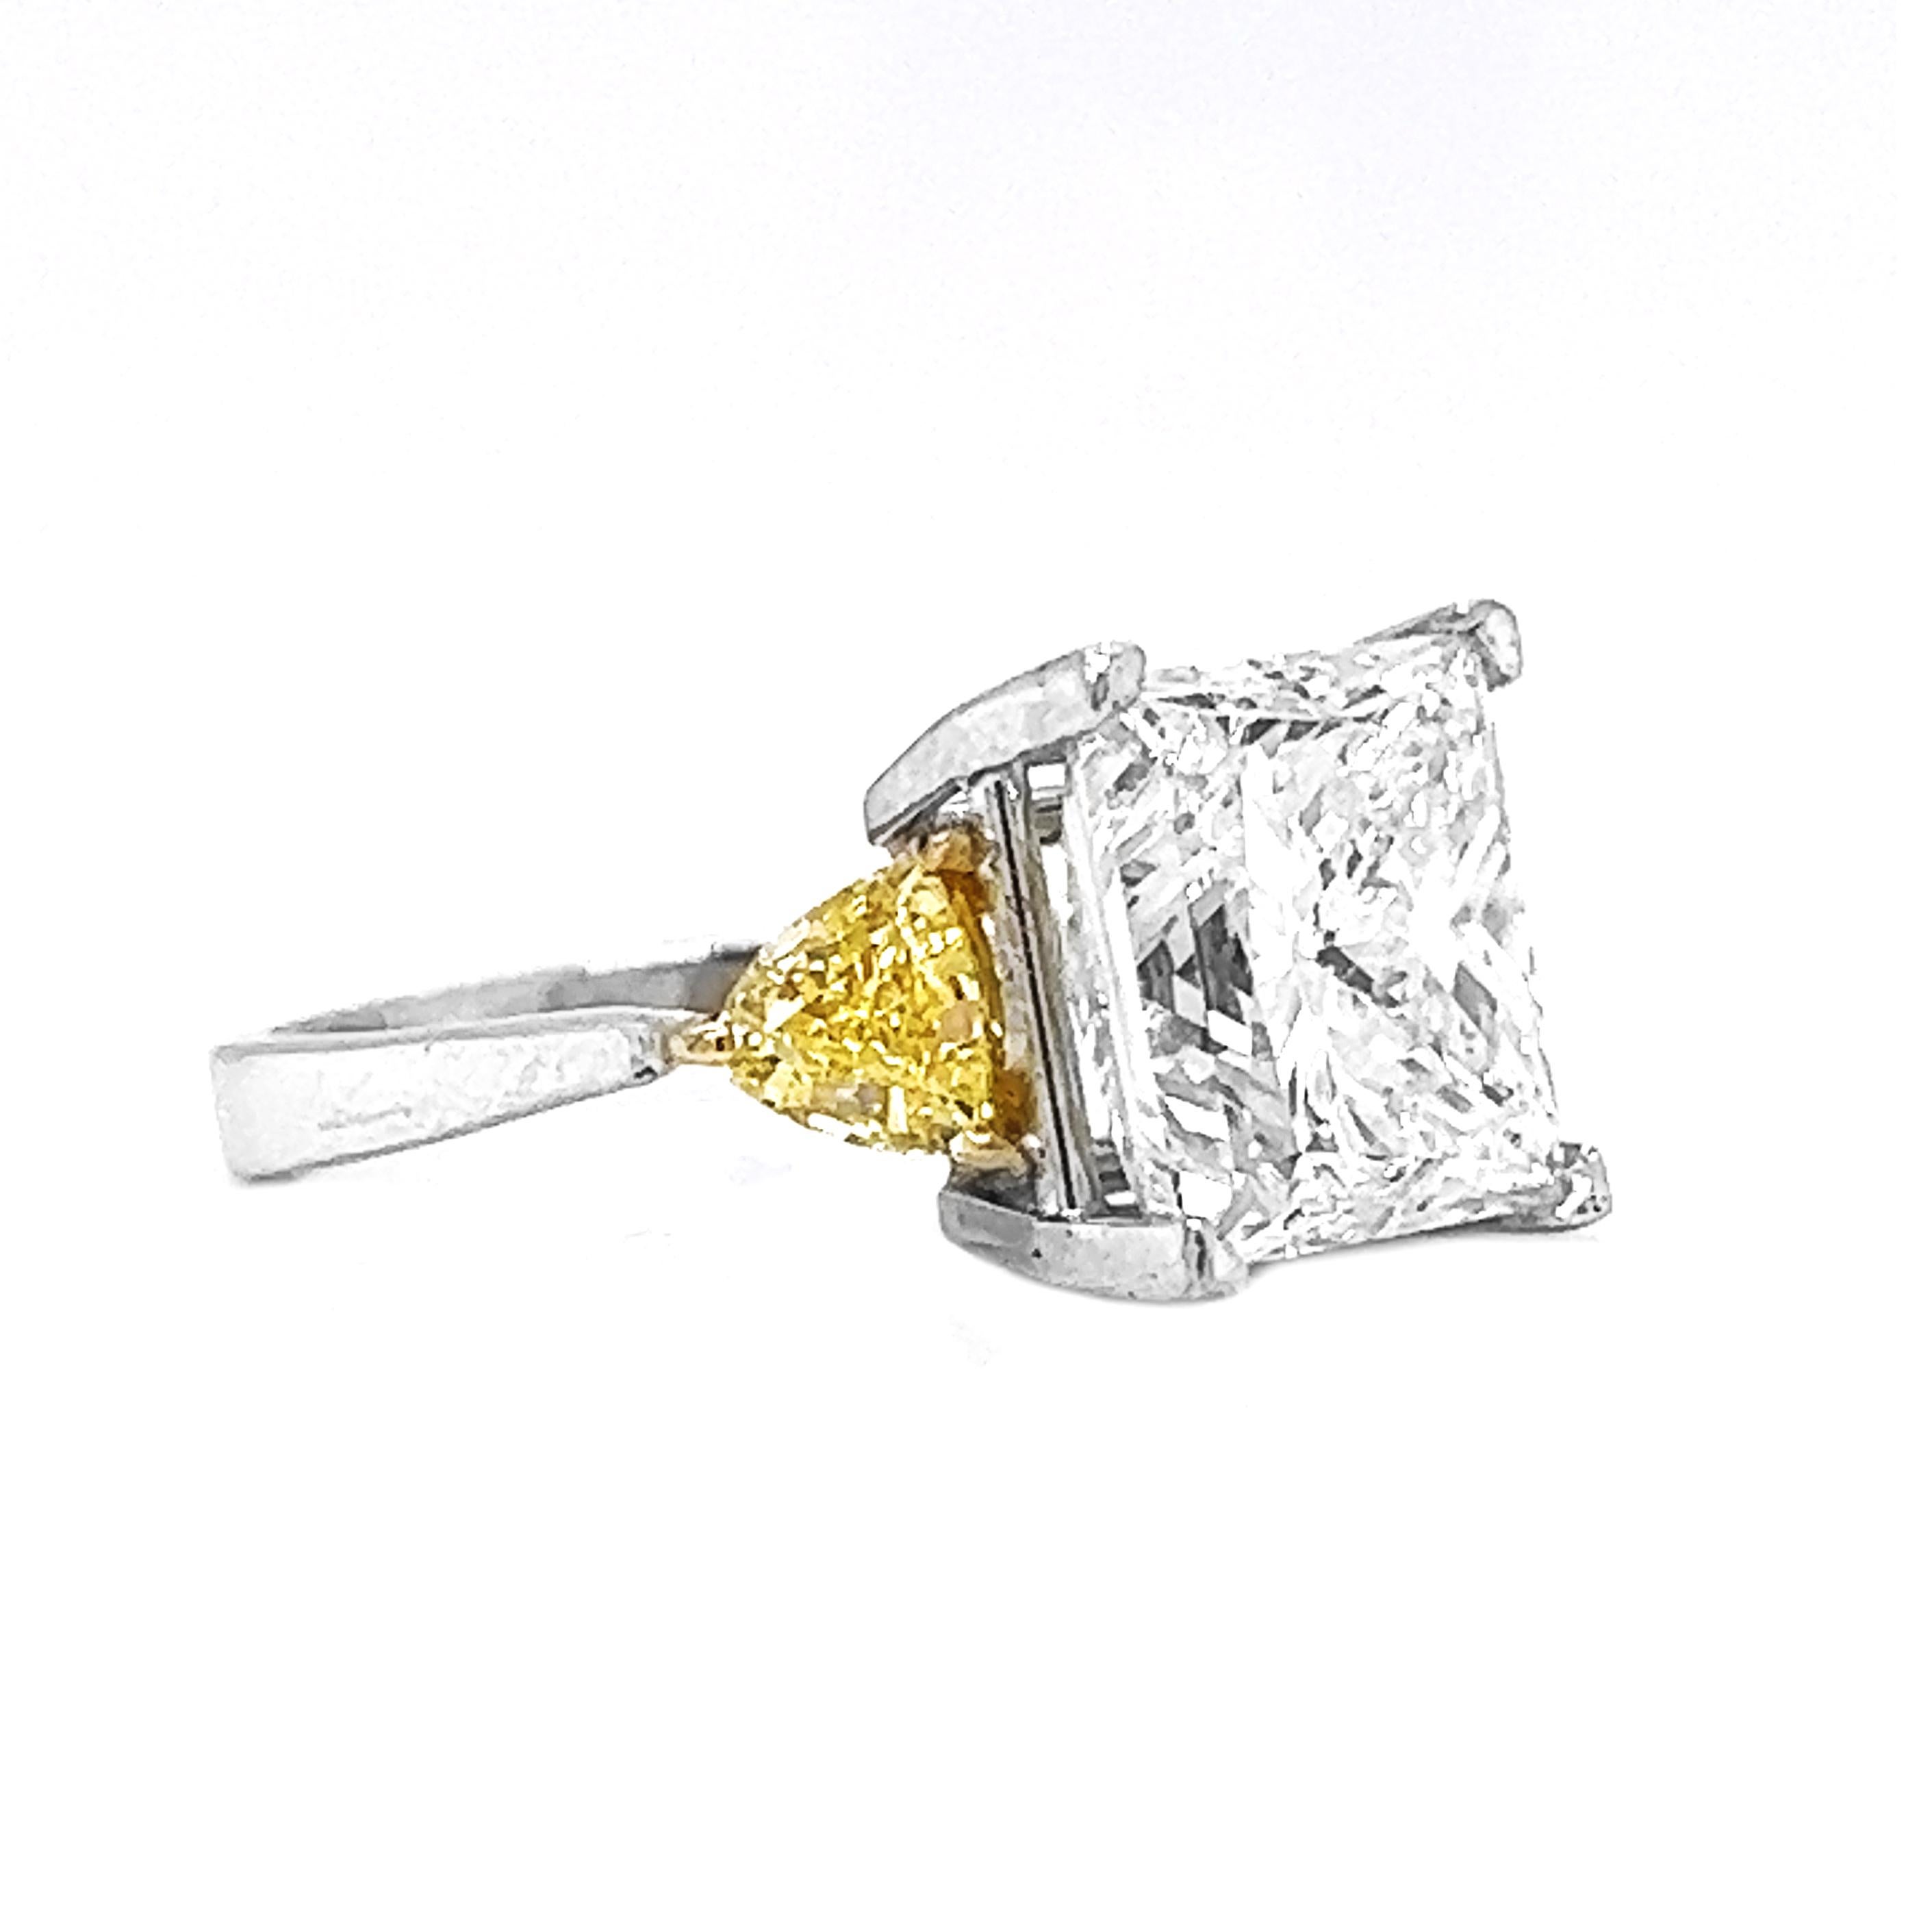 Introducing the EGL Certified 7.02 Carat Princess and Trillion Cut Diamond 3 Stone Ring in 18KT Gold, a masterpiece that radiates opulence and showcases the brilliance of rare and exquisite diamonds. Full of luster 

This exceptional ring features a